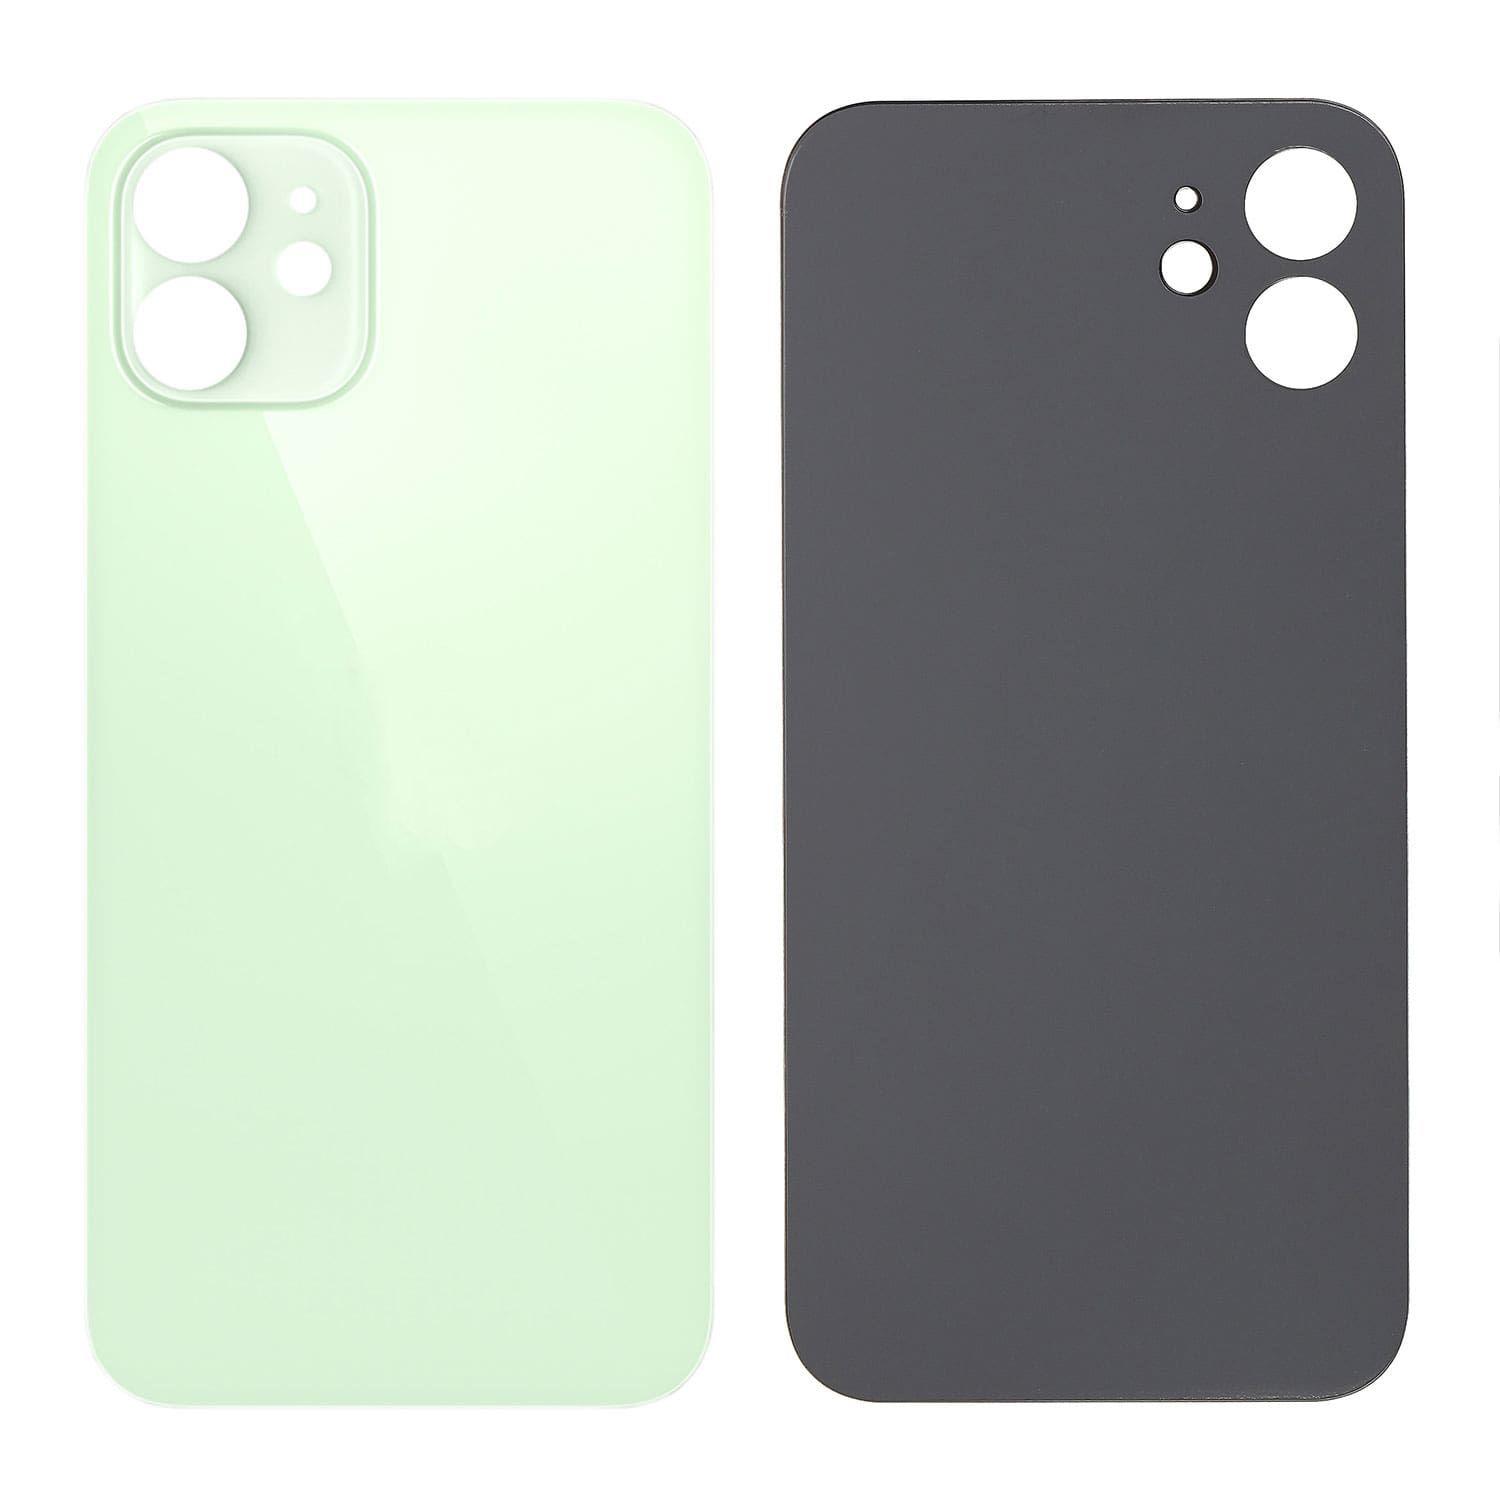 Battery cover iPhone 12 mini with bigger hole for camera glass - green